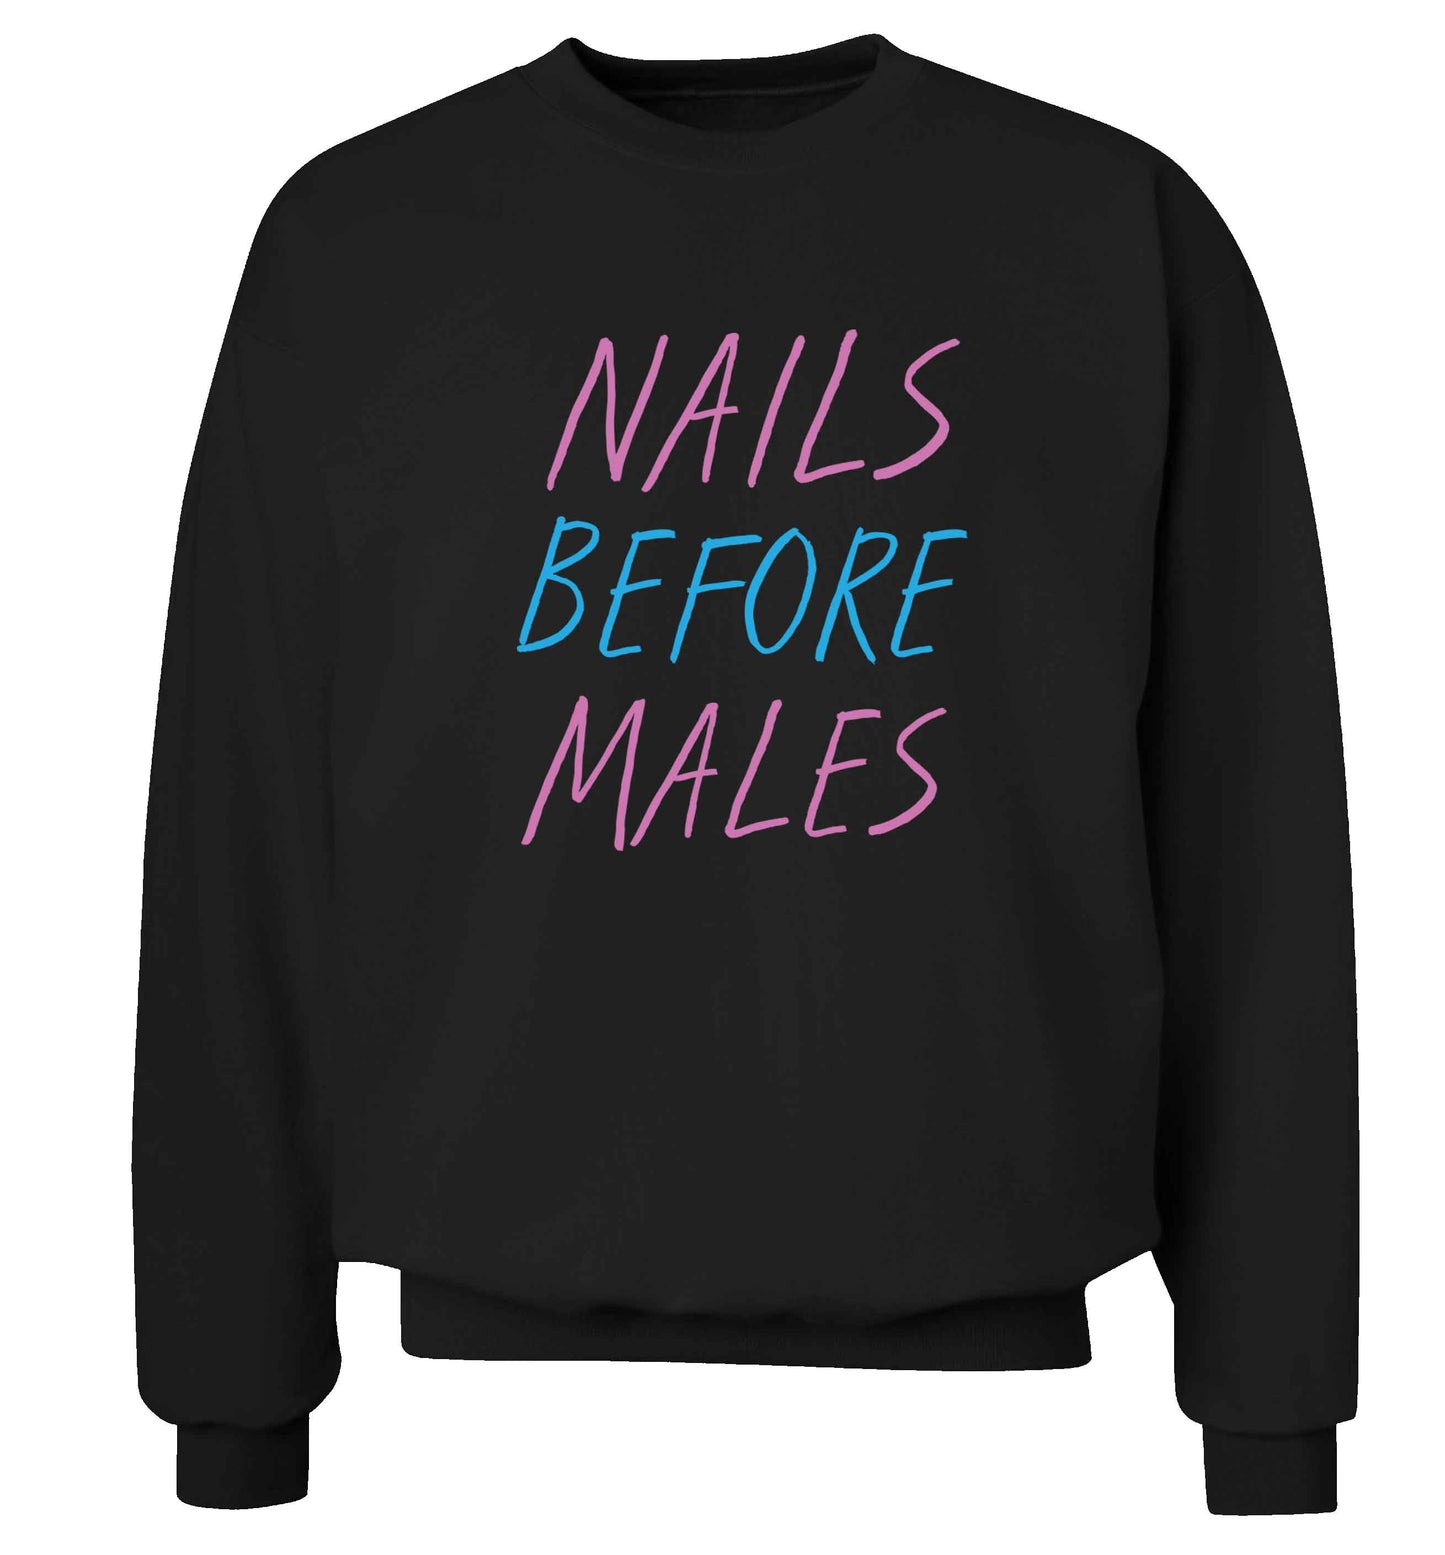 Nails before males adult's unisex black sweater 2XL